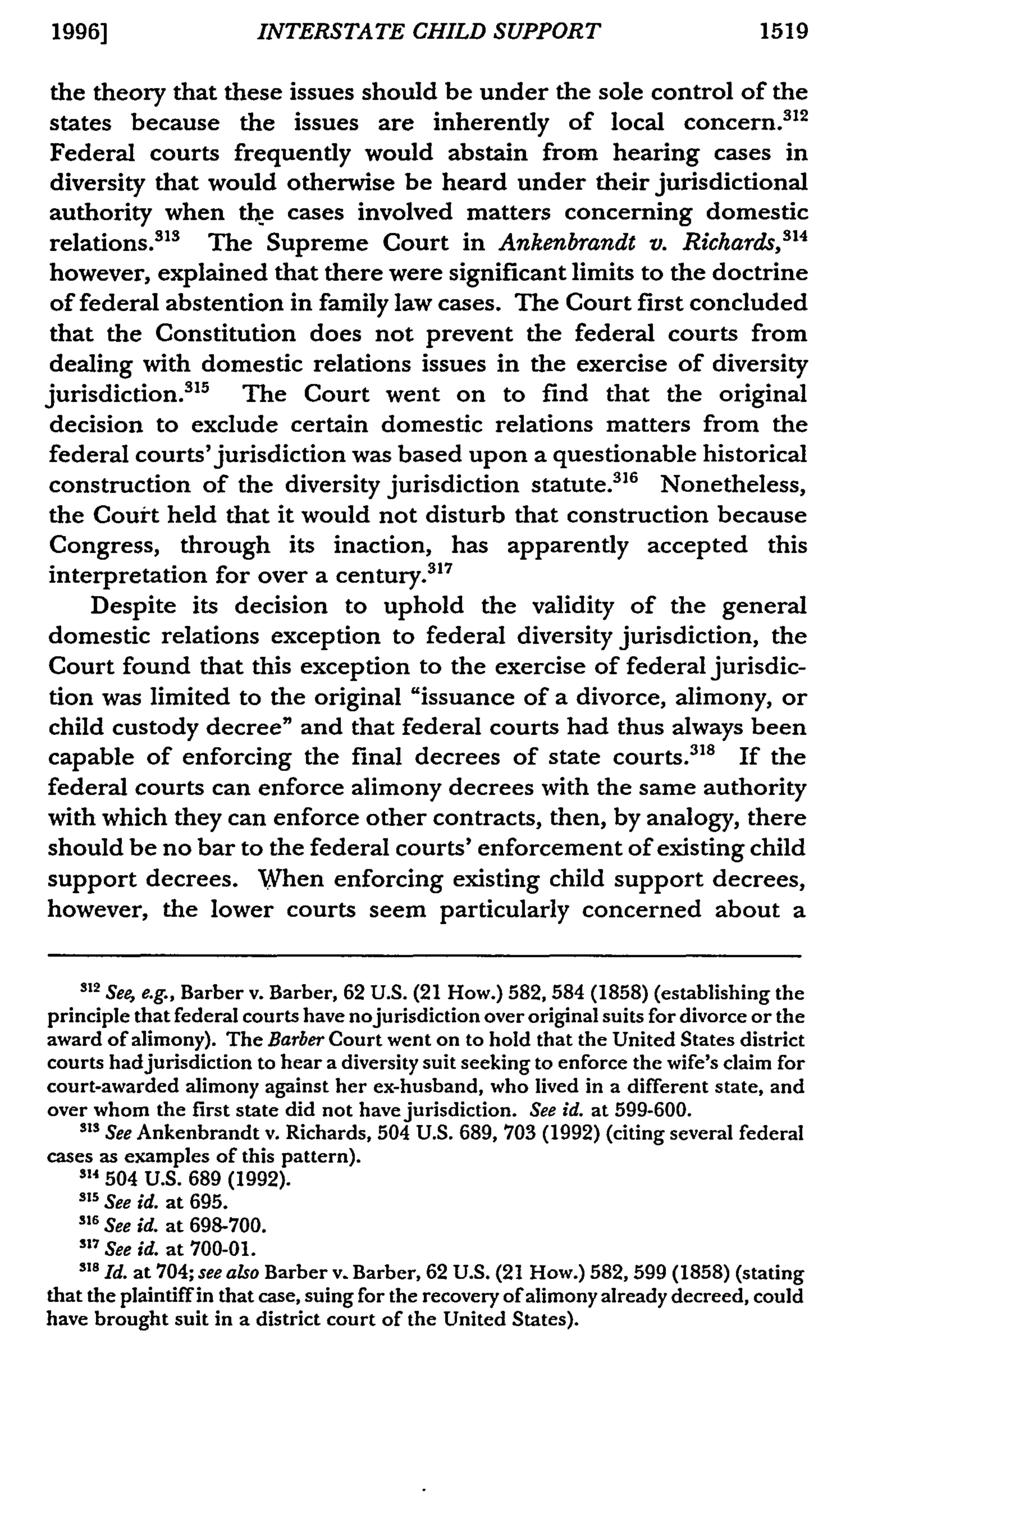 INTERSTATE CHILD SUPPORT 1519 the theory that these issues should be under the sole control of the 12 states because the issues are inherently of local concern.